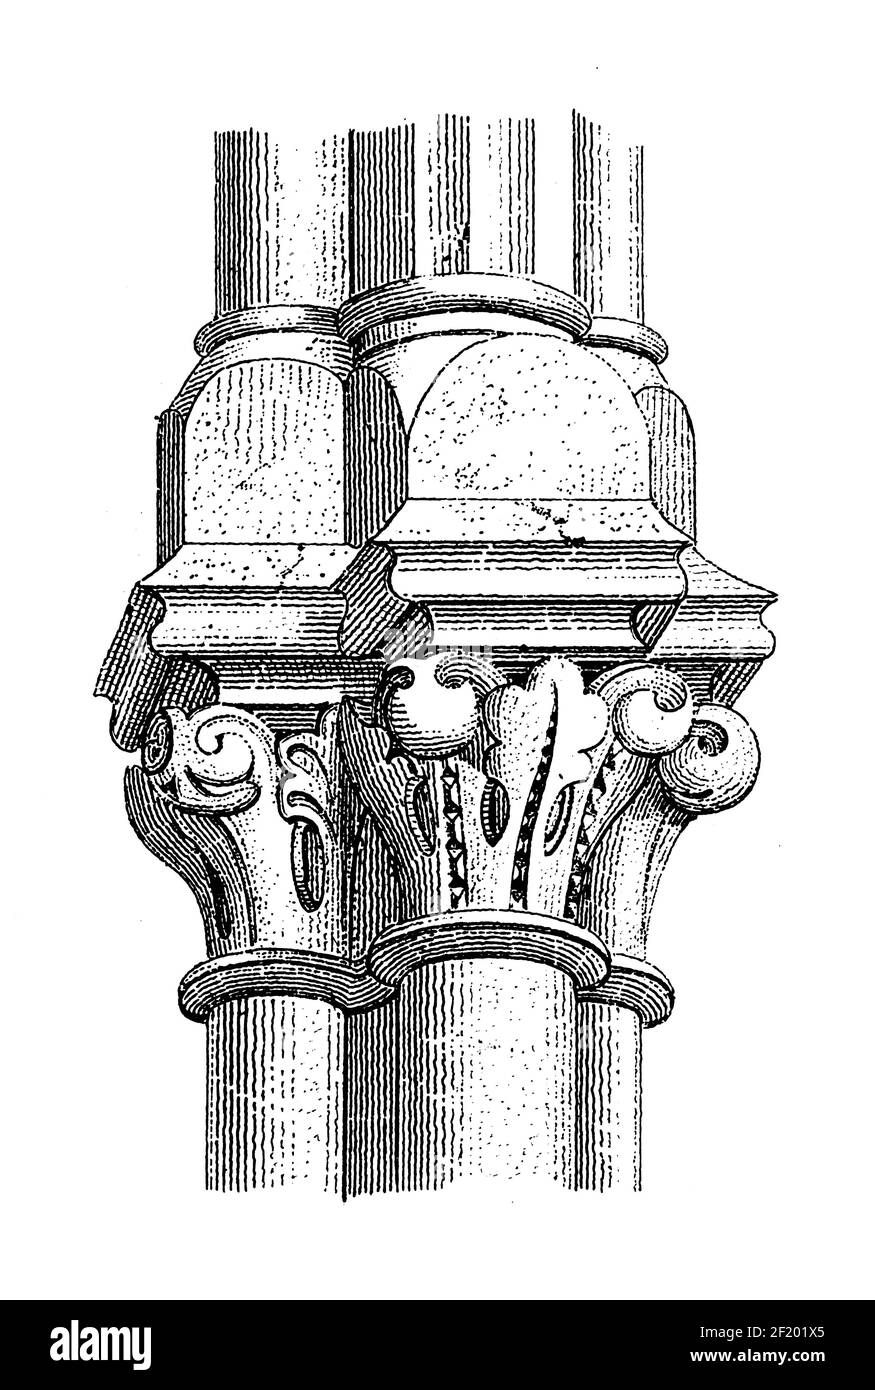 19th-century illustration of capital column detail from the baptistery of St Gereon's Basilica. Published in Systematischer Bilder-Atlas Stock Photo